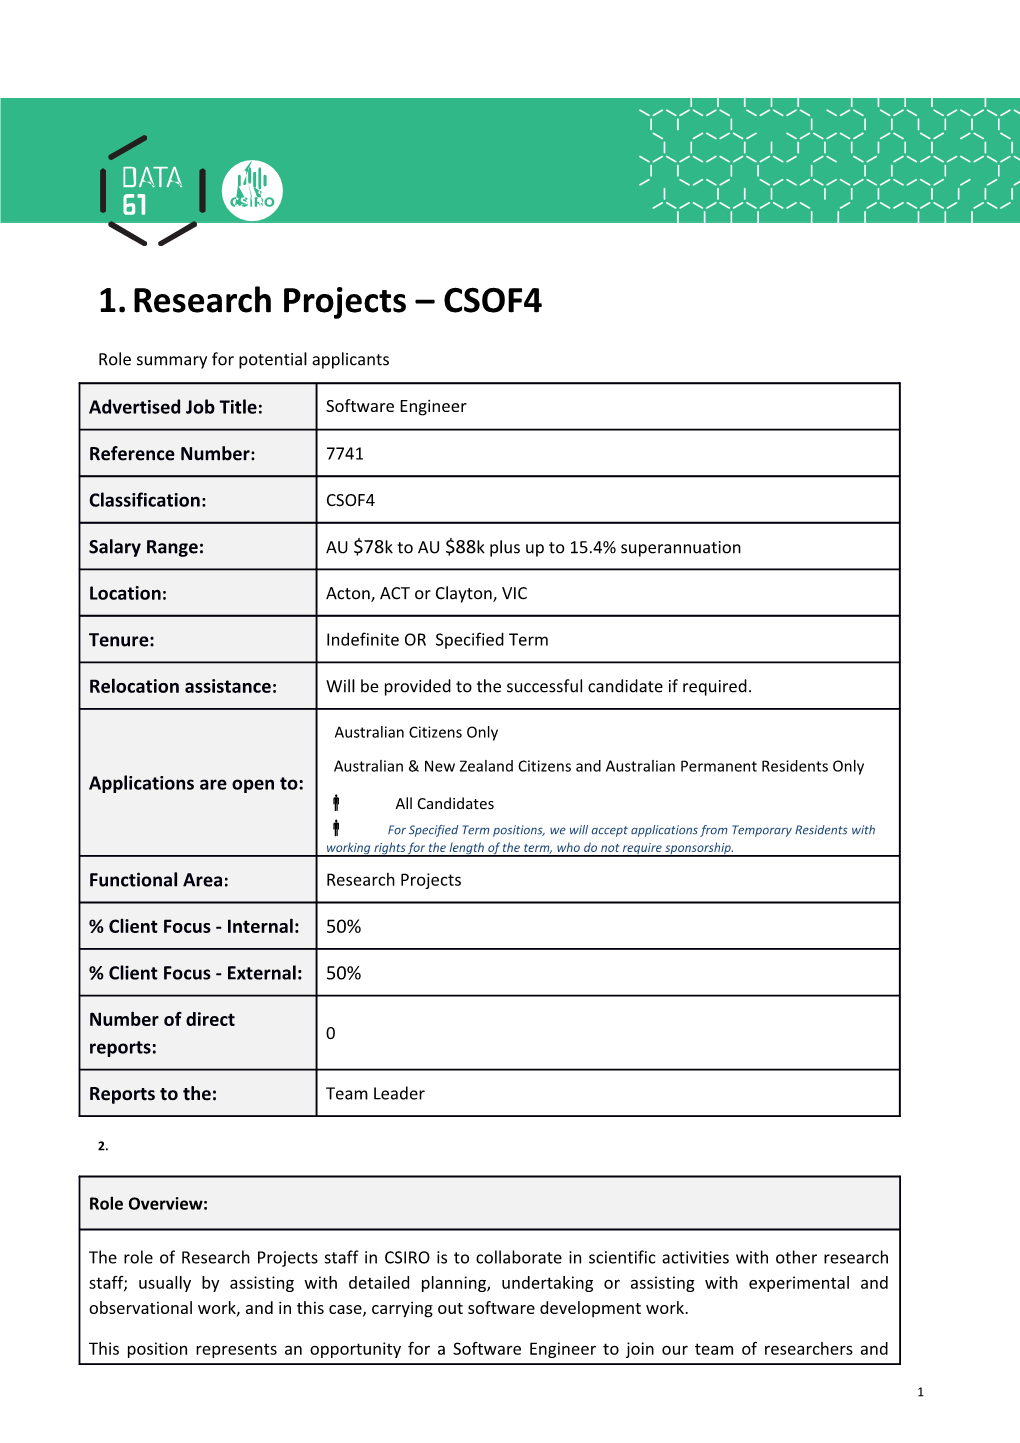 Research Projects CSOF4